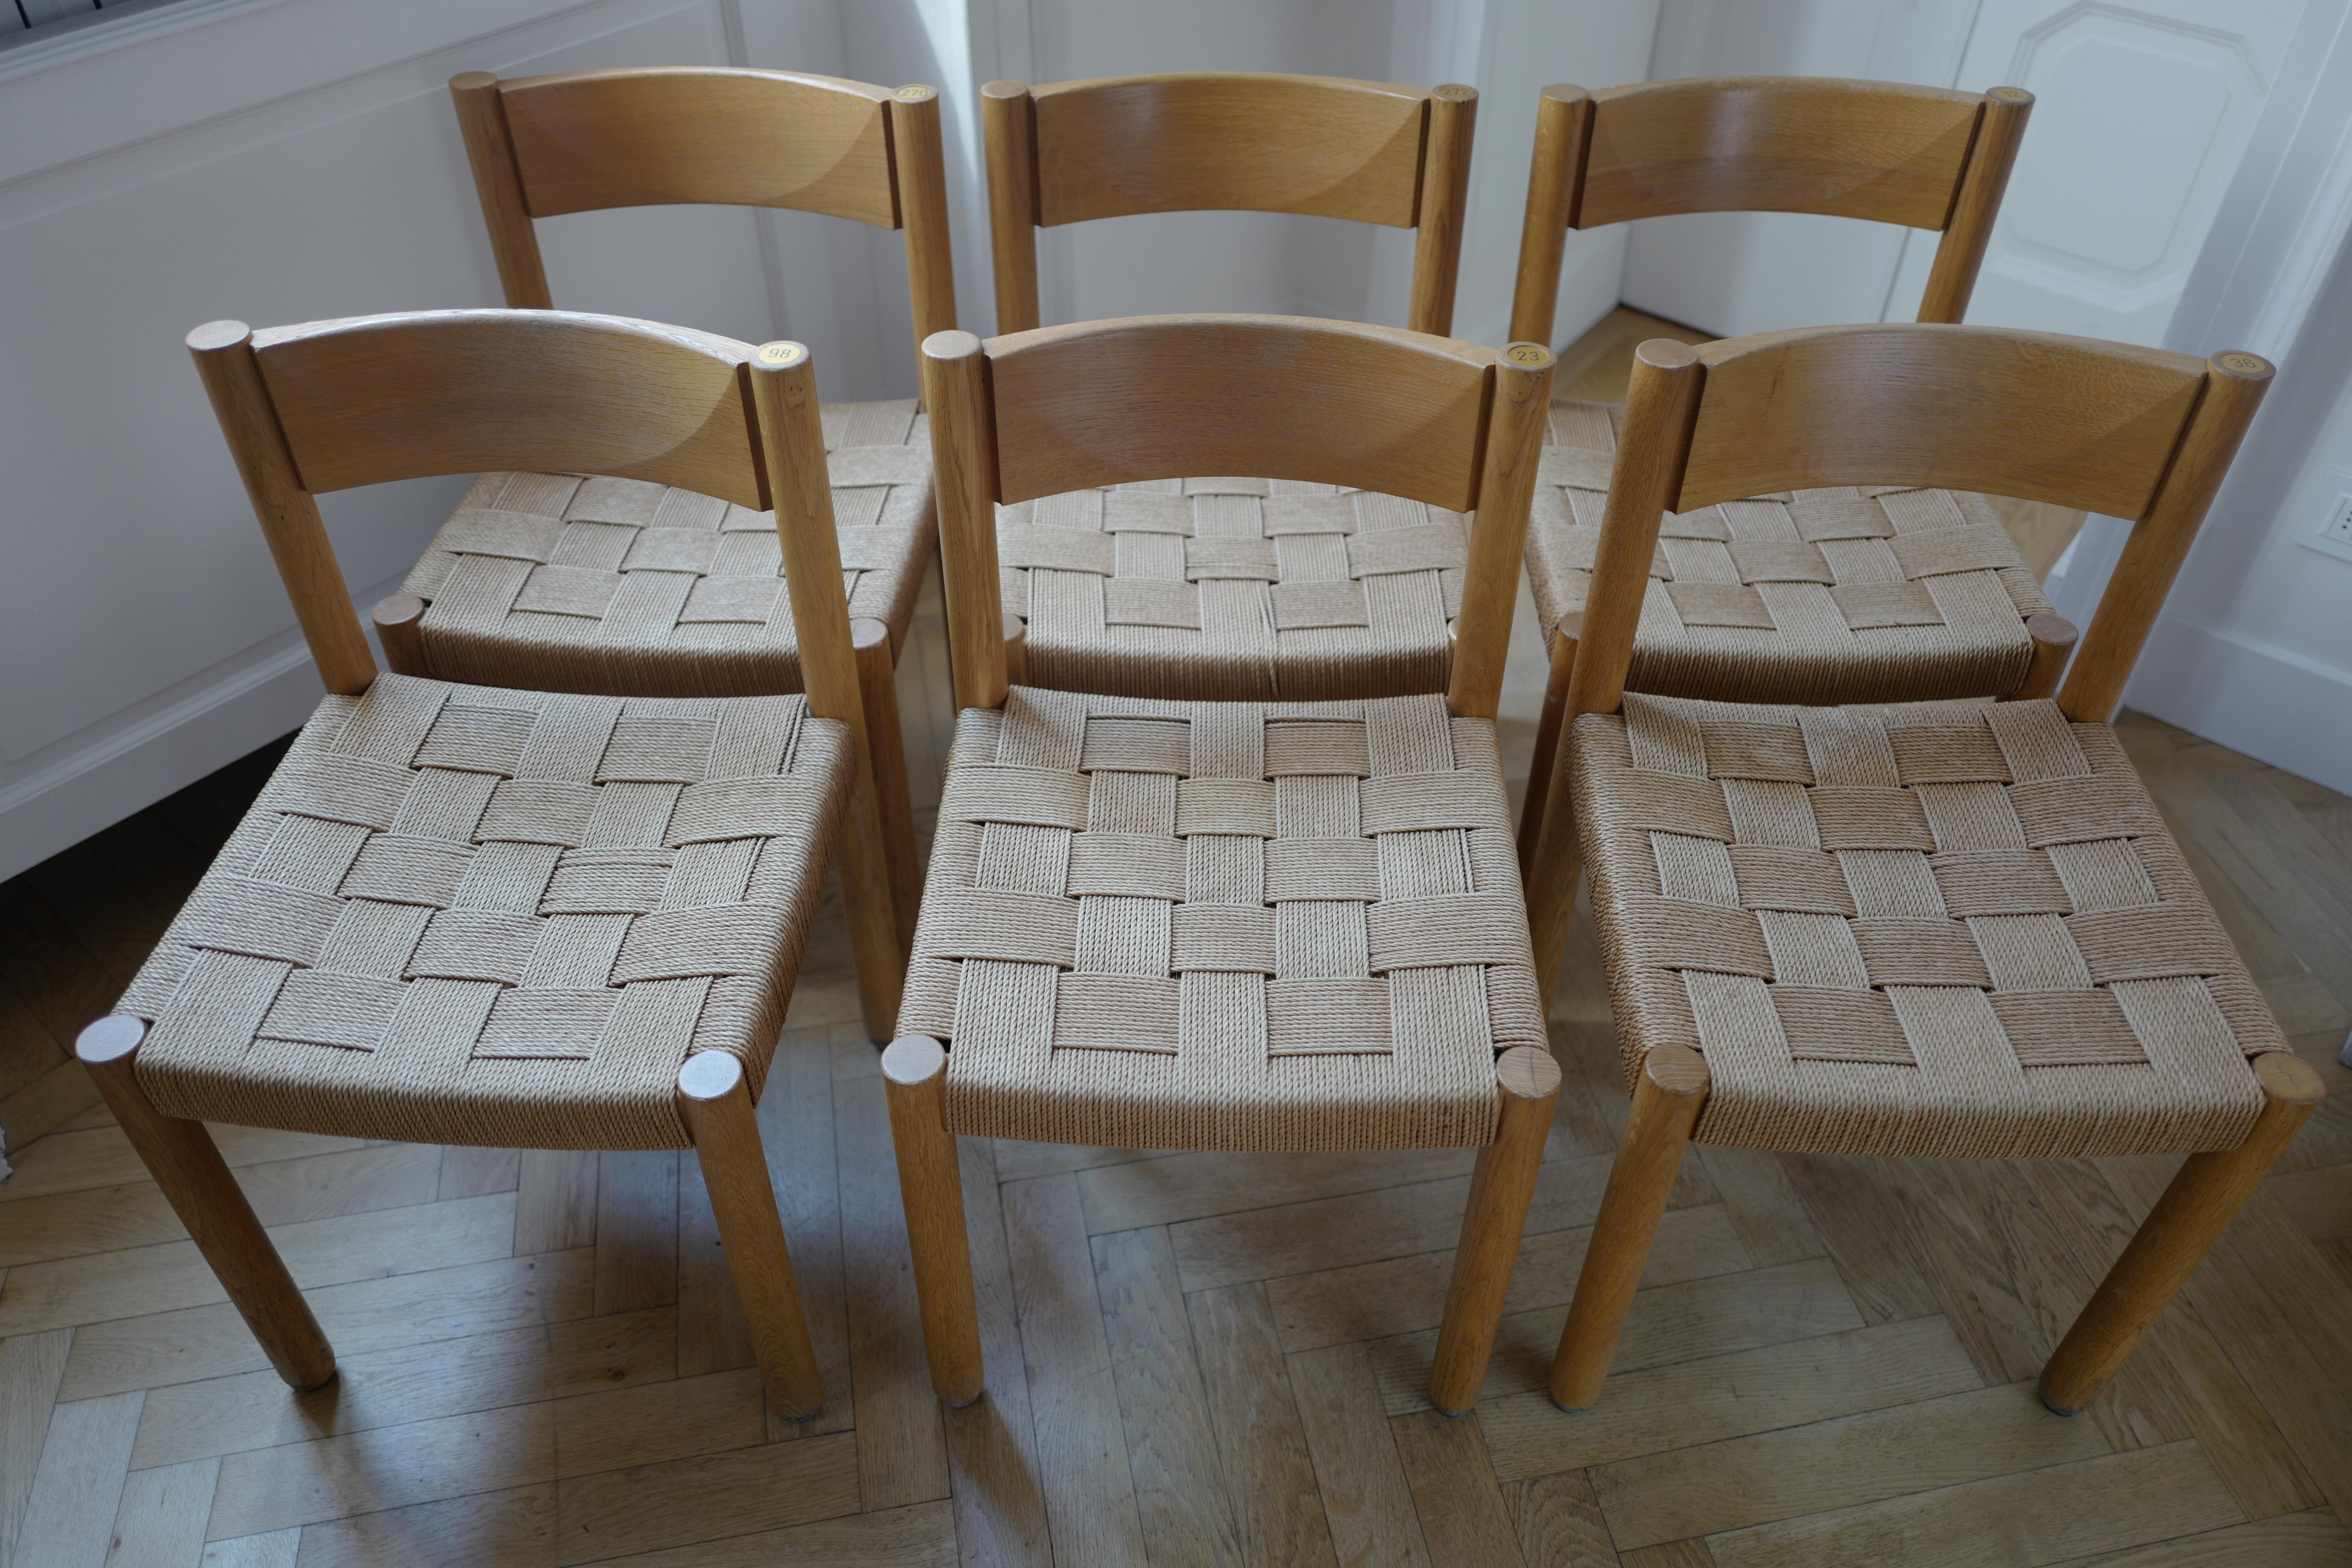 Set of six oak wood and woven rope chairs model 6200 by Robert and Trix Haussmann from Zurich Switzerland. These married architects did not gain as much fame as their Milanese counterparts in America but in Europe they are a postmodern sensation. A